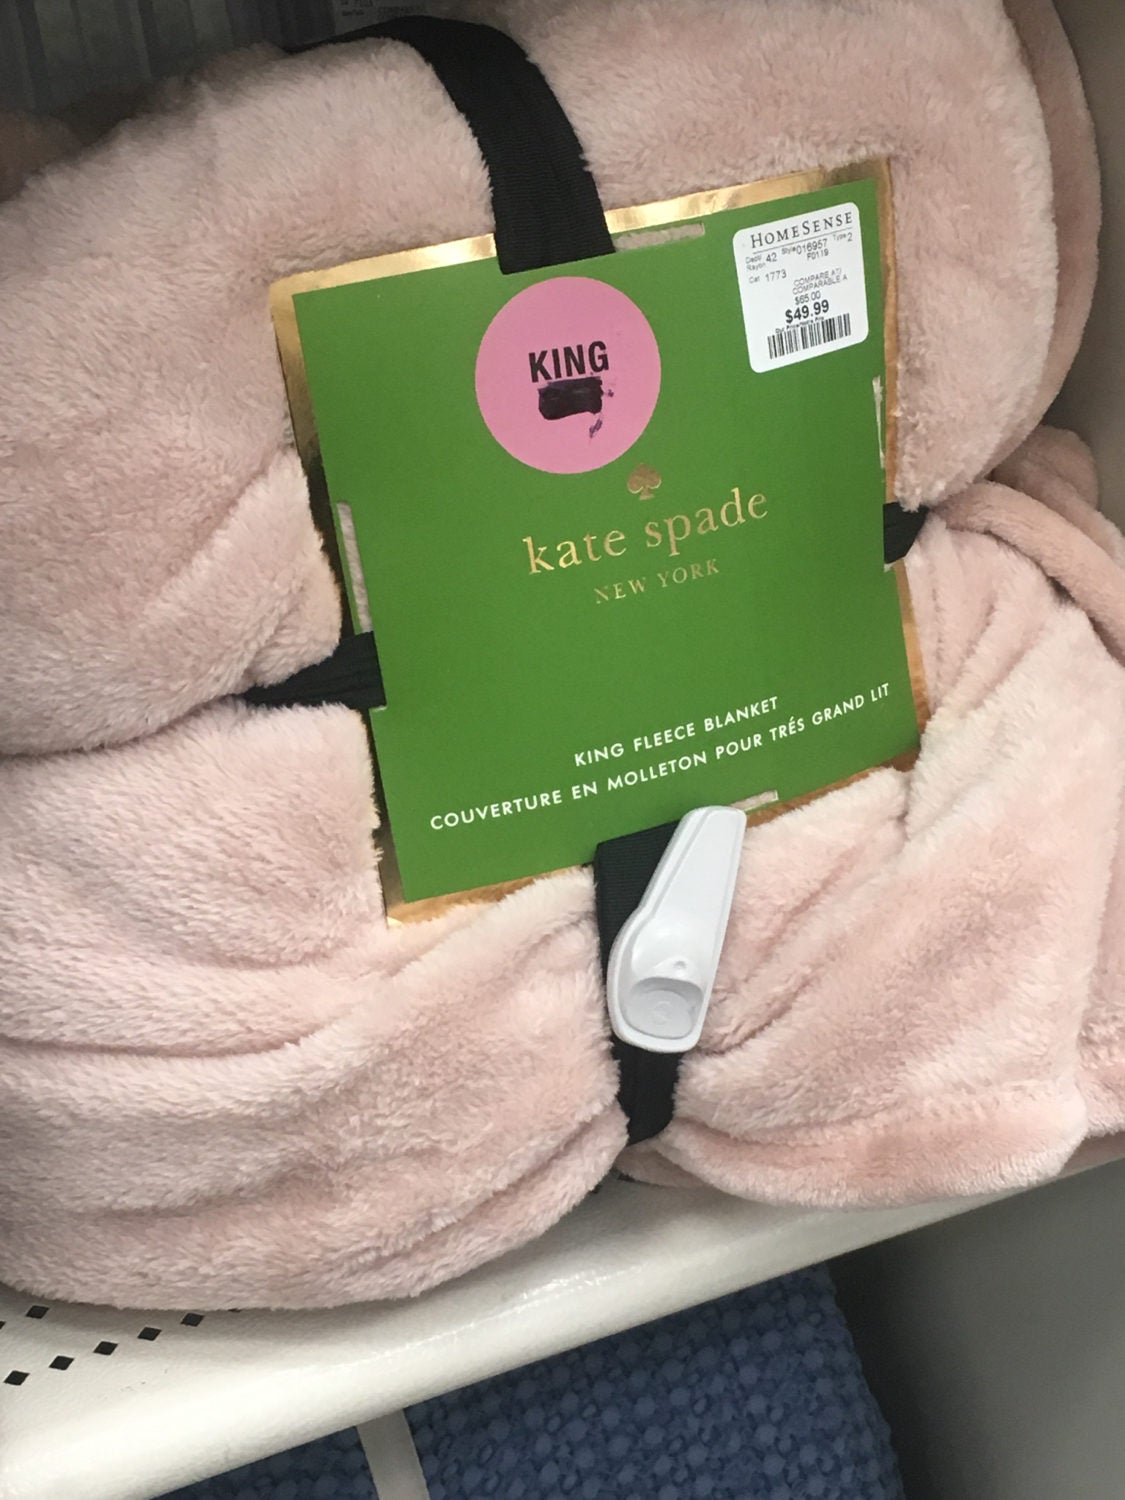 Costco] Kate Spade Blanket - In Store $ - Page 8   Forums